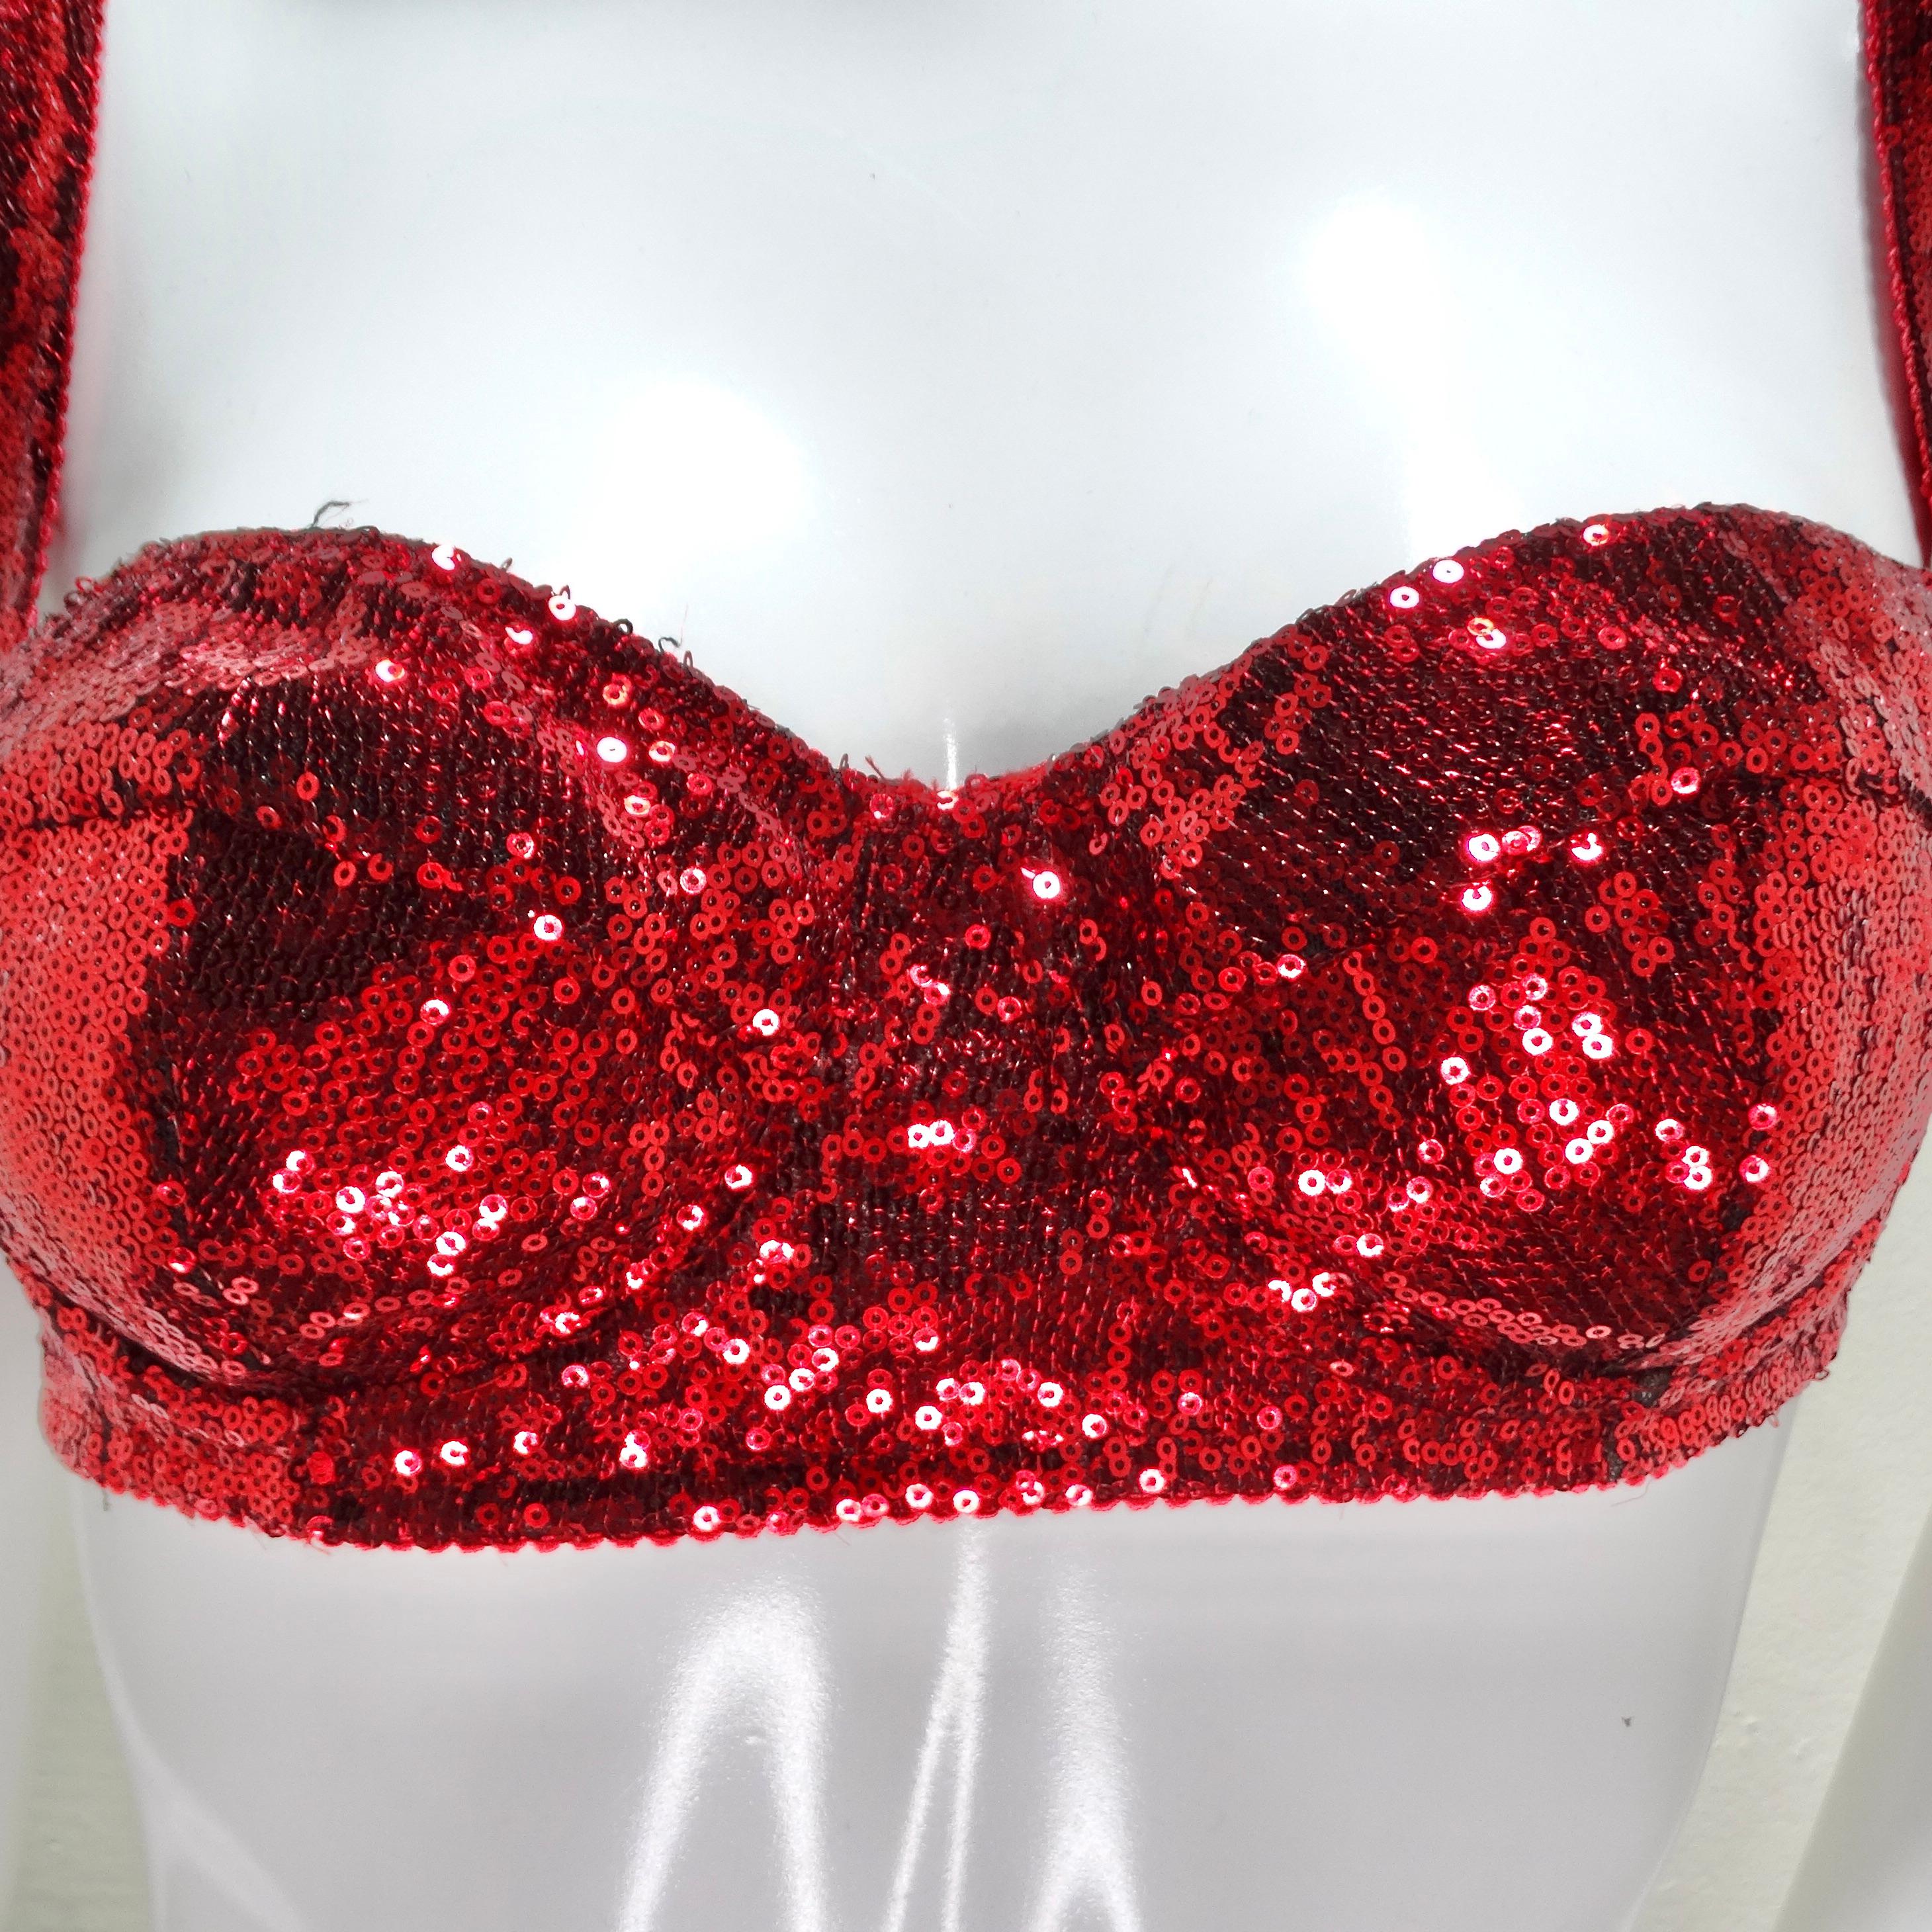 Make a bold statement with the Dolce & Gabbana Sequin Balconette Bra, a classic balconette-style bra that doubles as a glamorous cropped bustier top. This distinctive piece, crafted by Dolce & Gabbana, showcases the brand's iconic silhouette with a